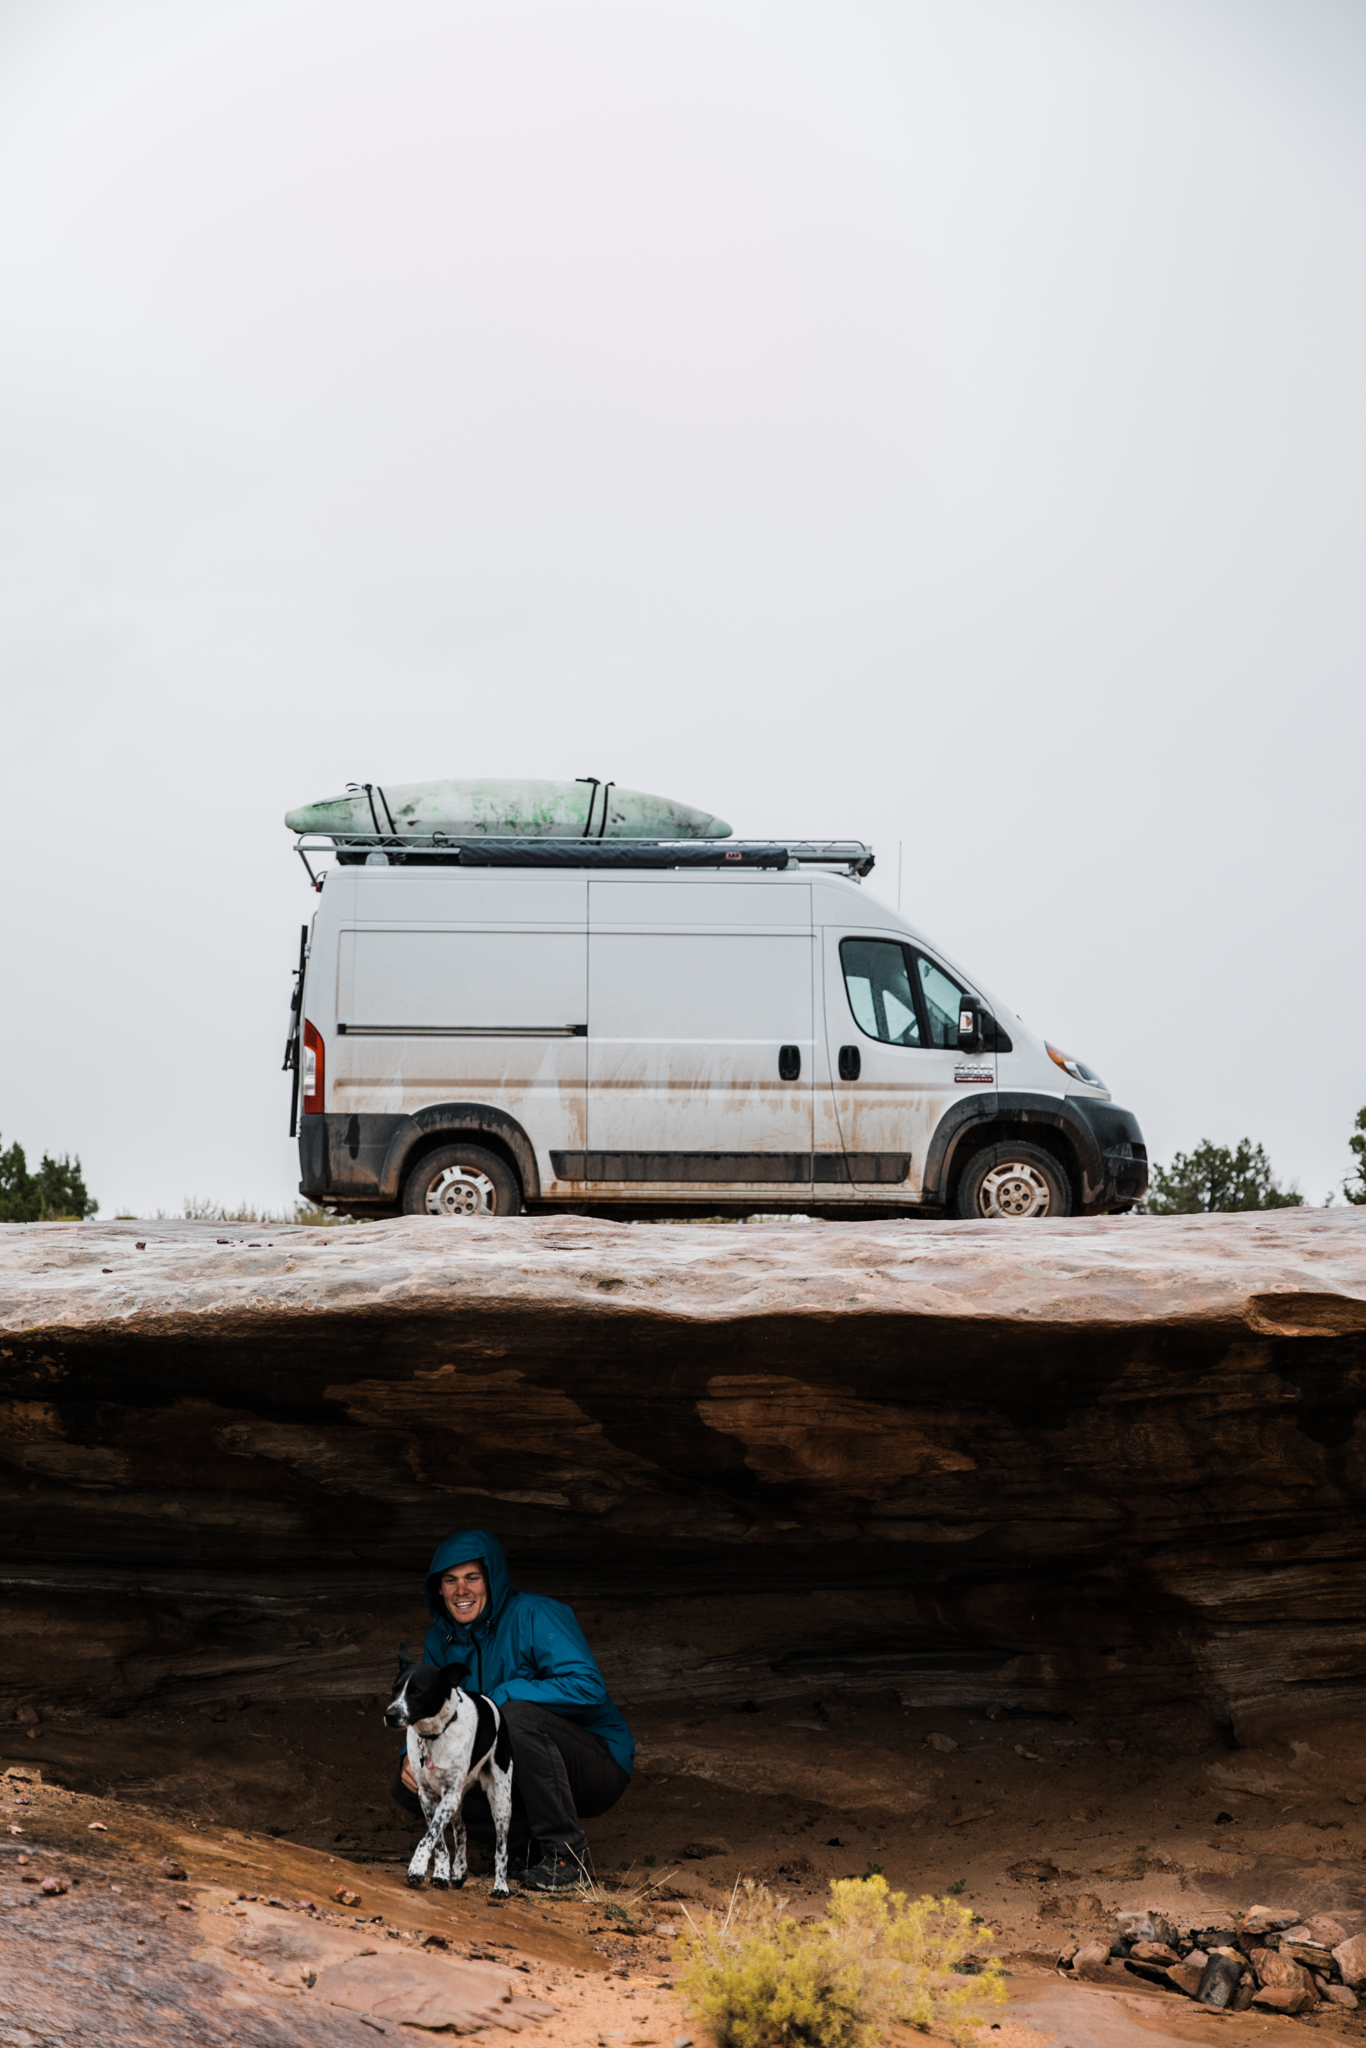 rainy day in moab utah | utah and california adventure elopement photographers | the hearnes adventure photography | www.thehearnes.com